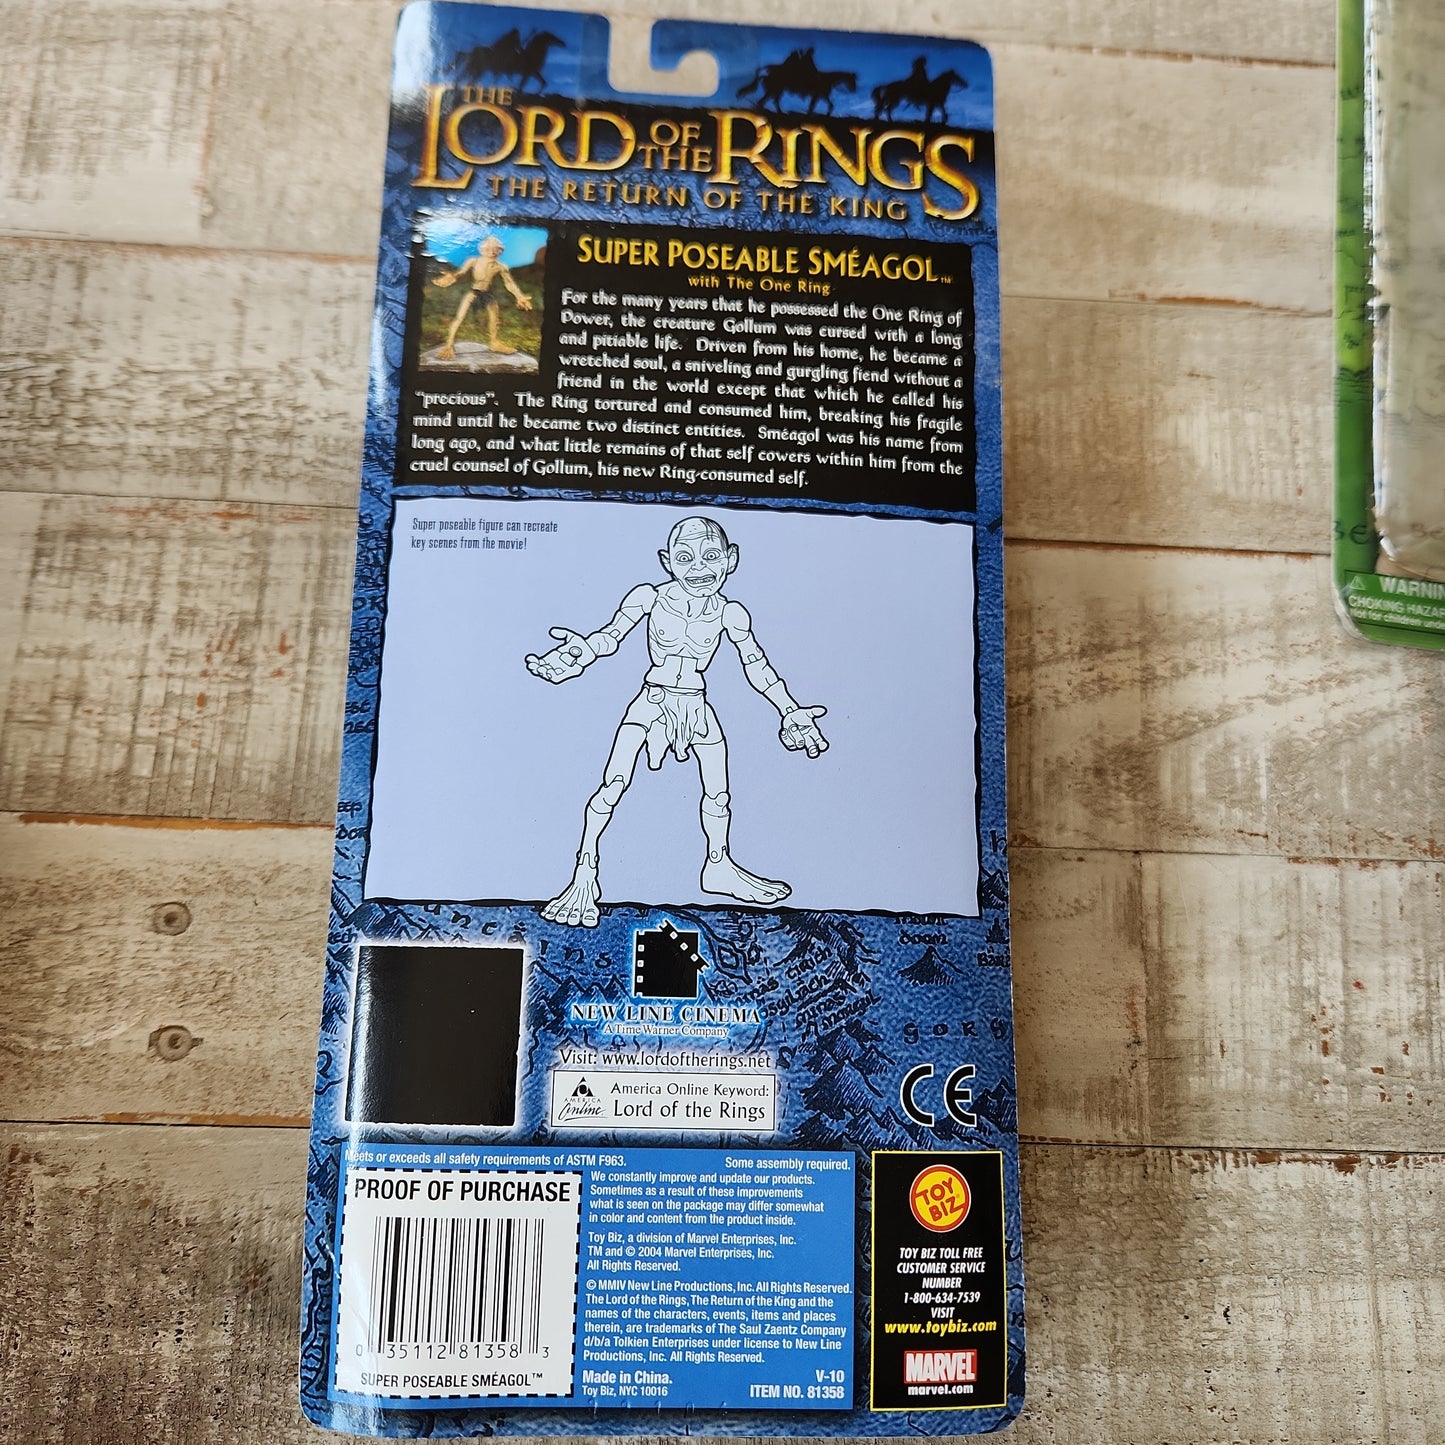 Lord of the Rings Super Poseable Smeagol with The One Ring Action Figure NRFP